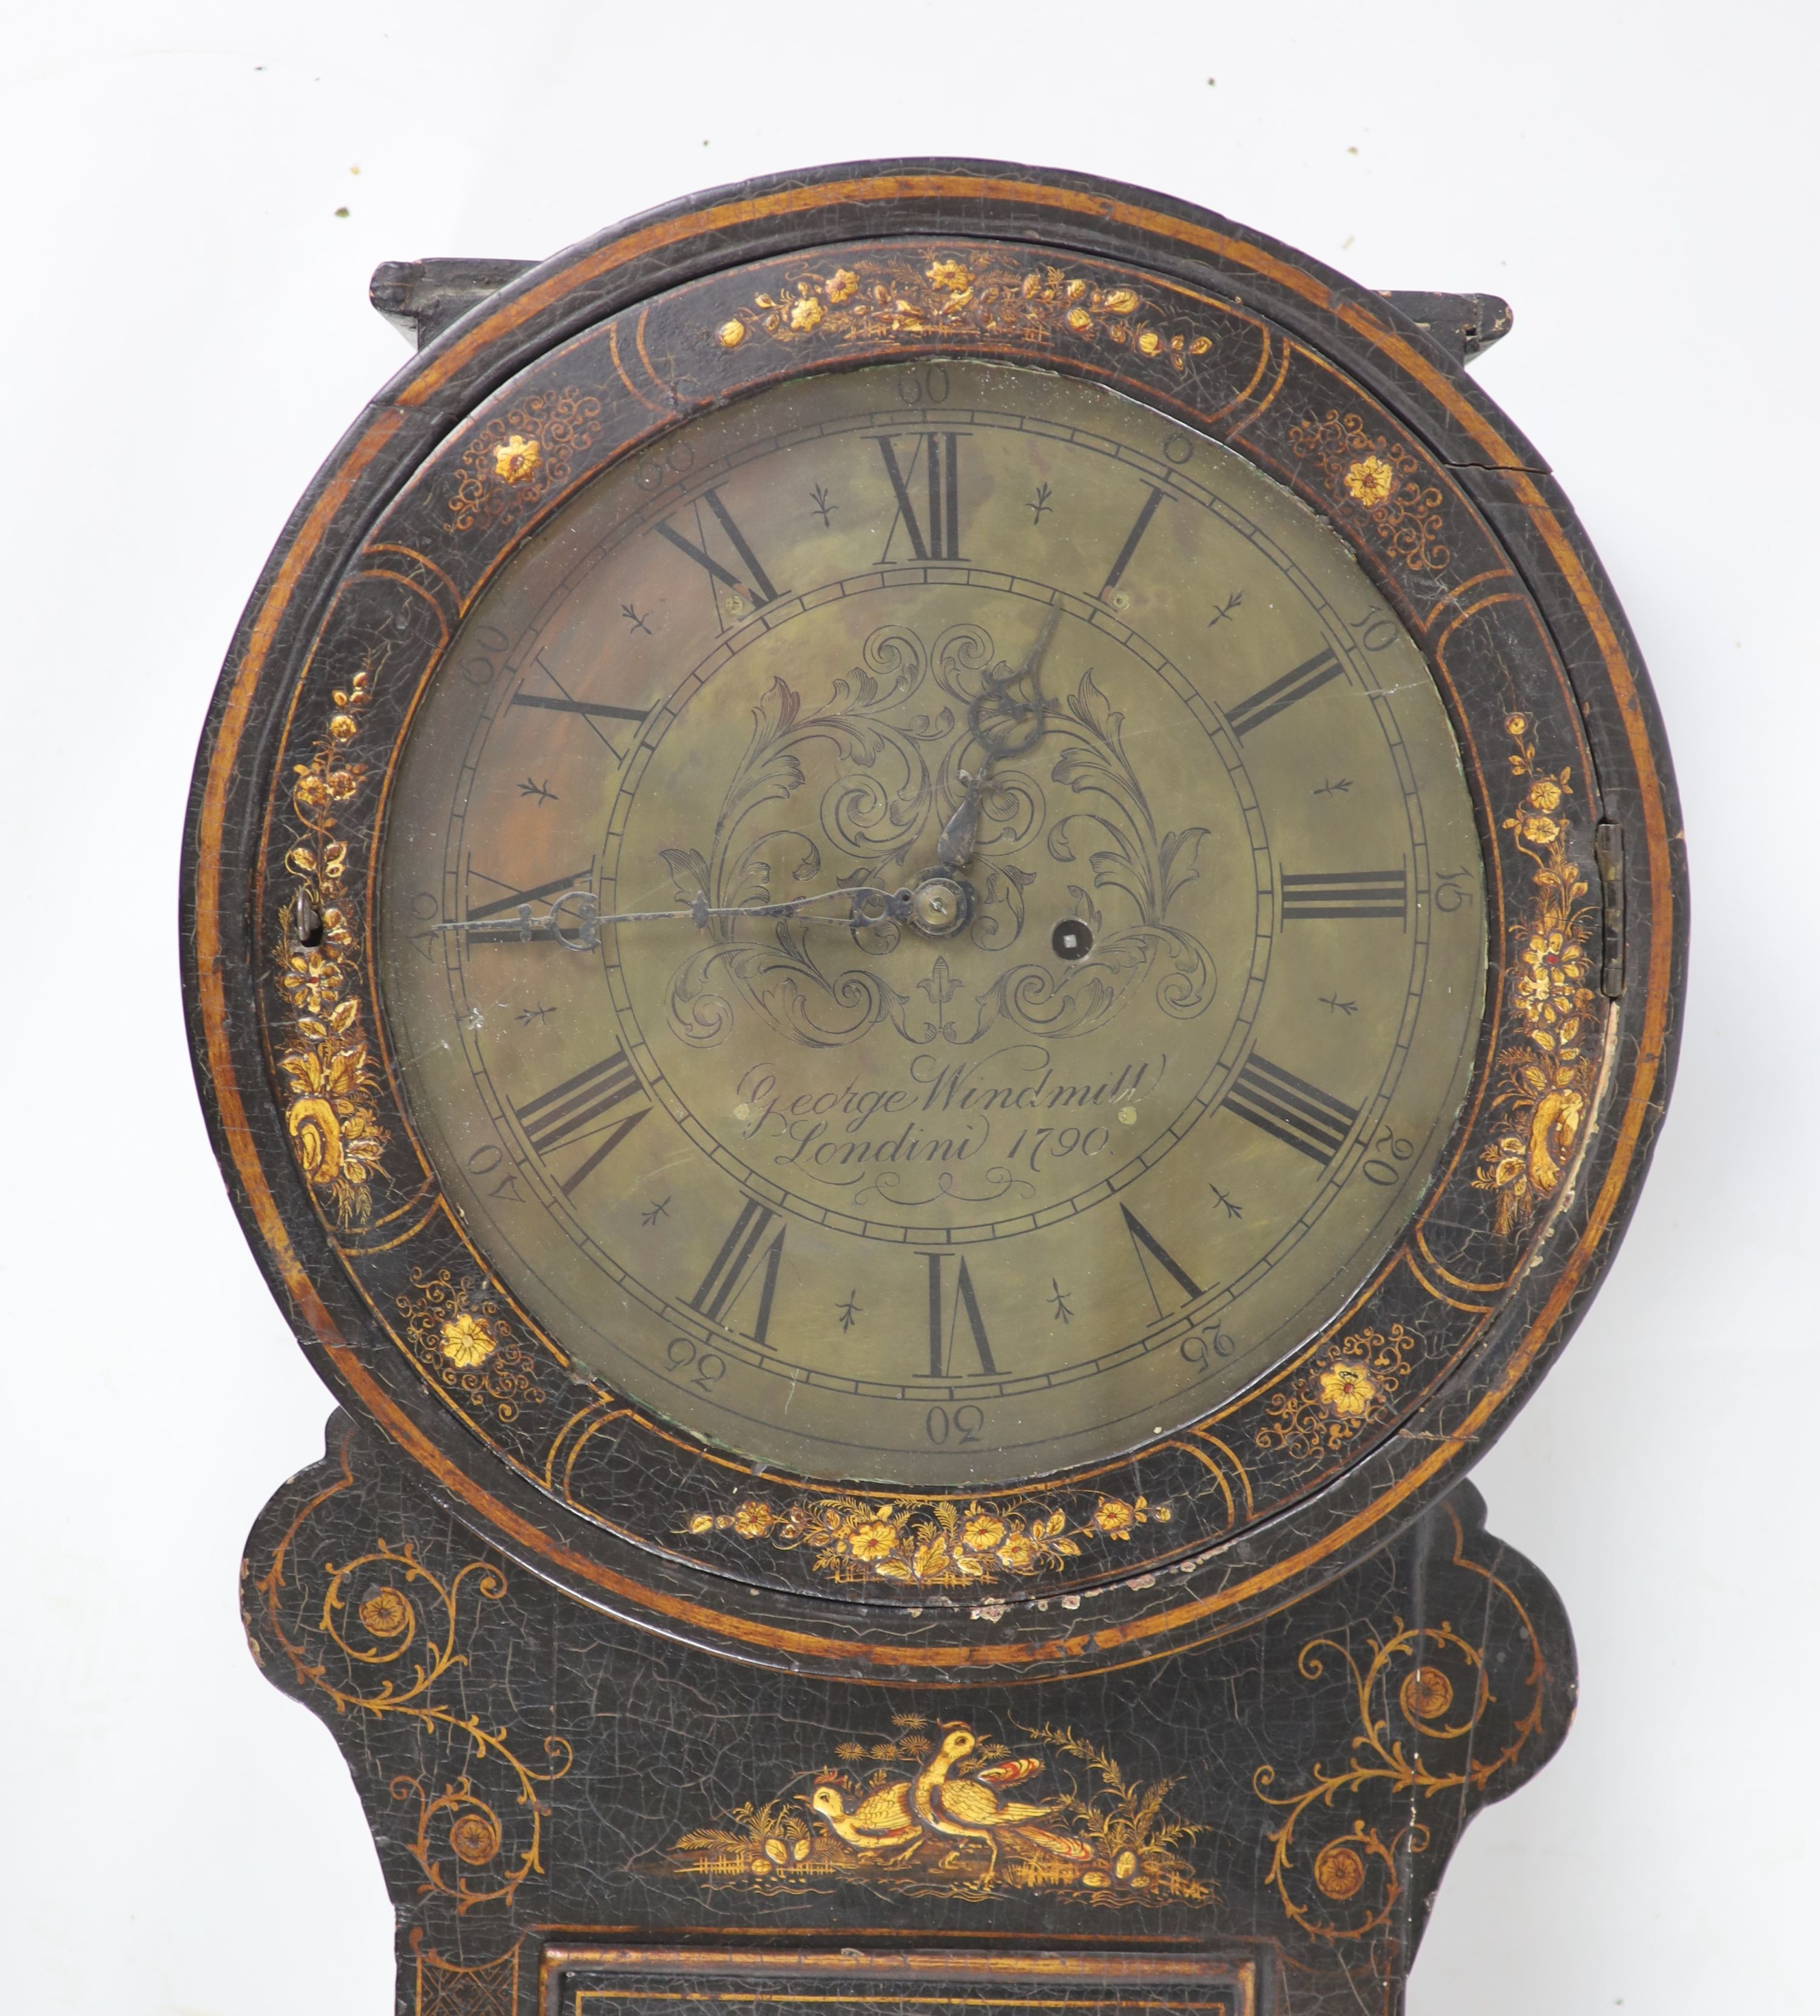 George Windmill of London, 1790. A George III japanned dropdial wall clock, diameter 46cm height 136cm